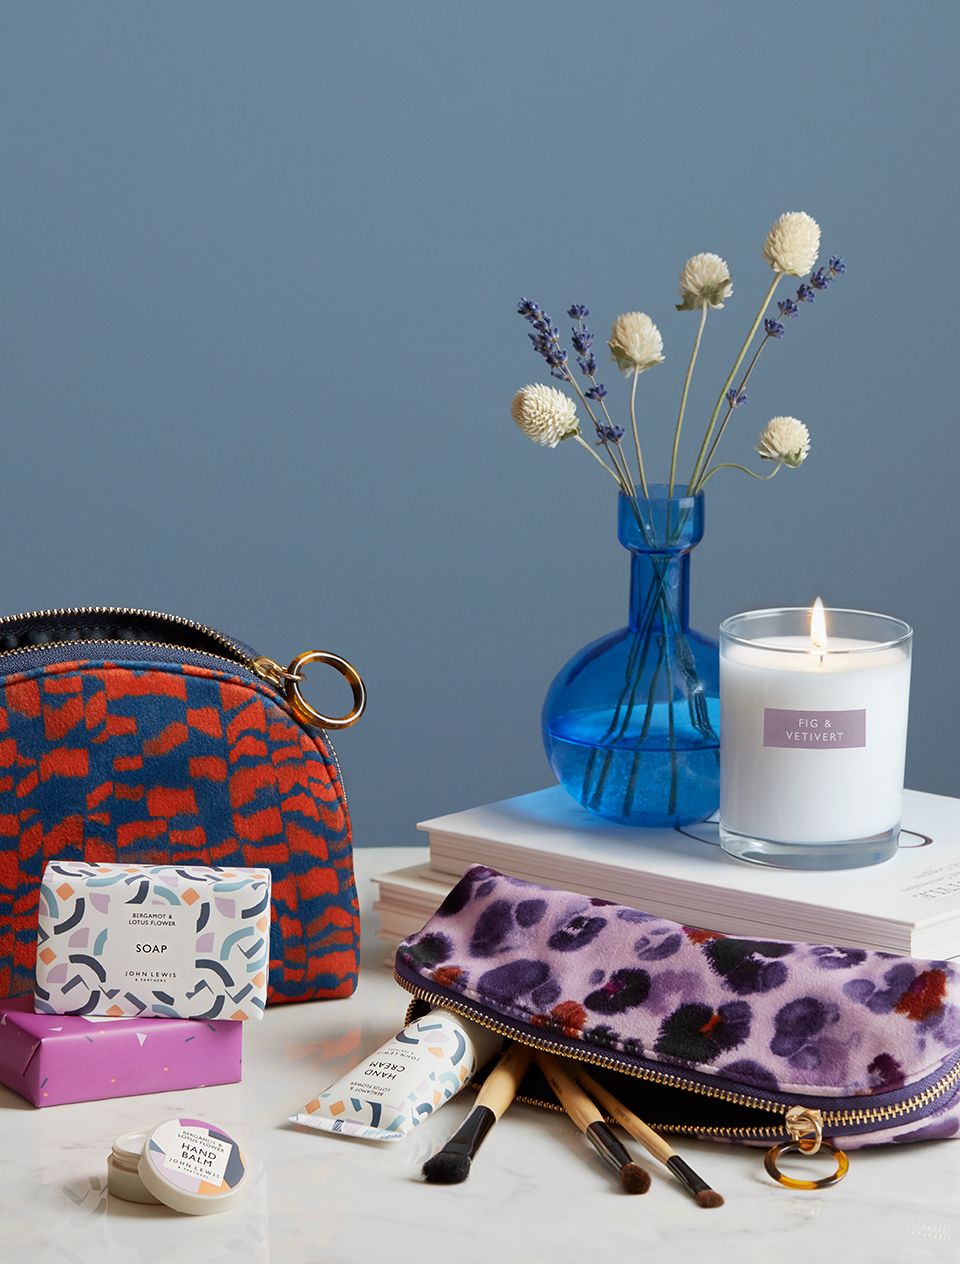 A selection of John Lewis & Partners gifts